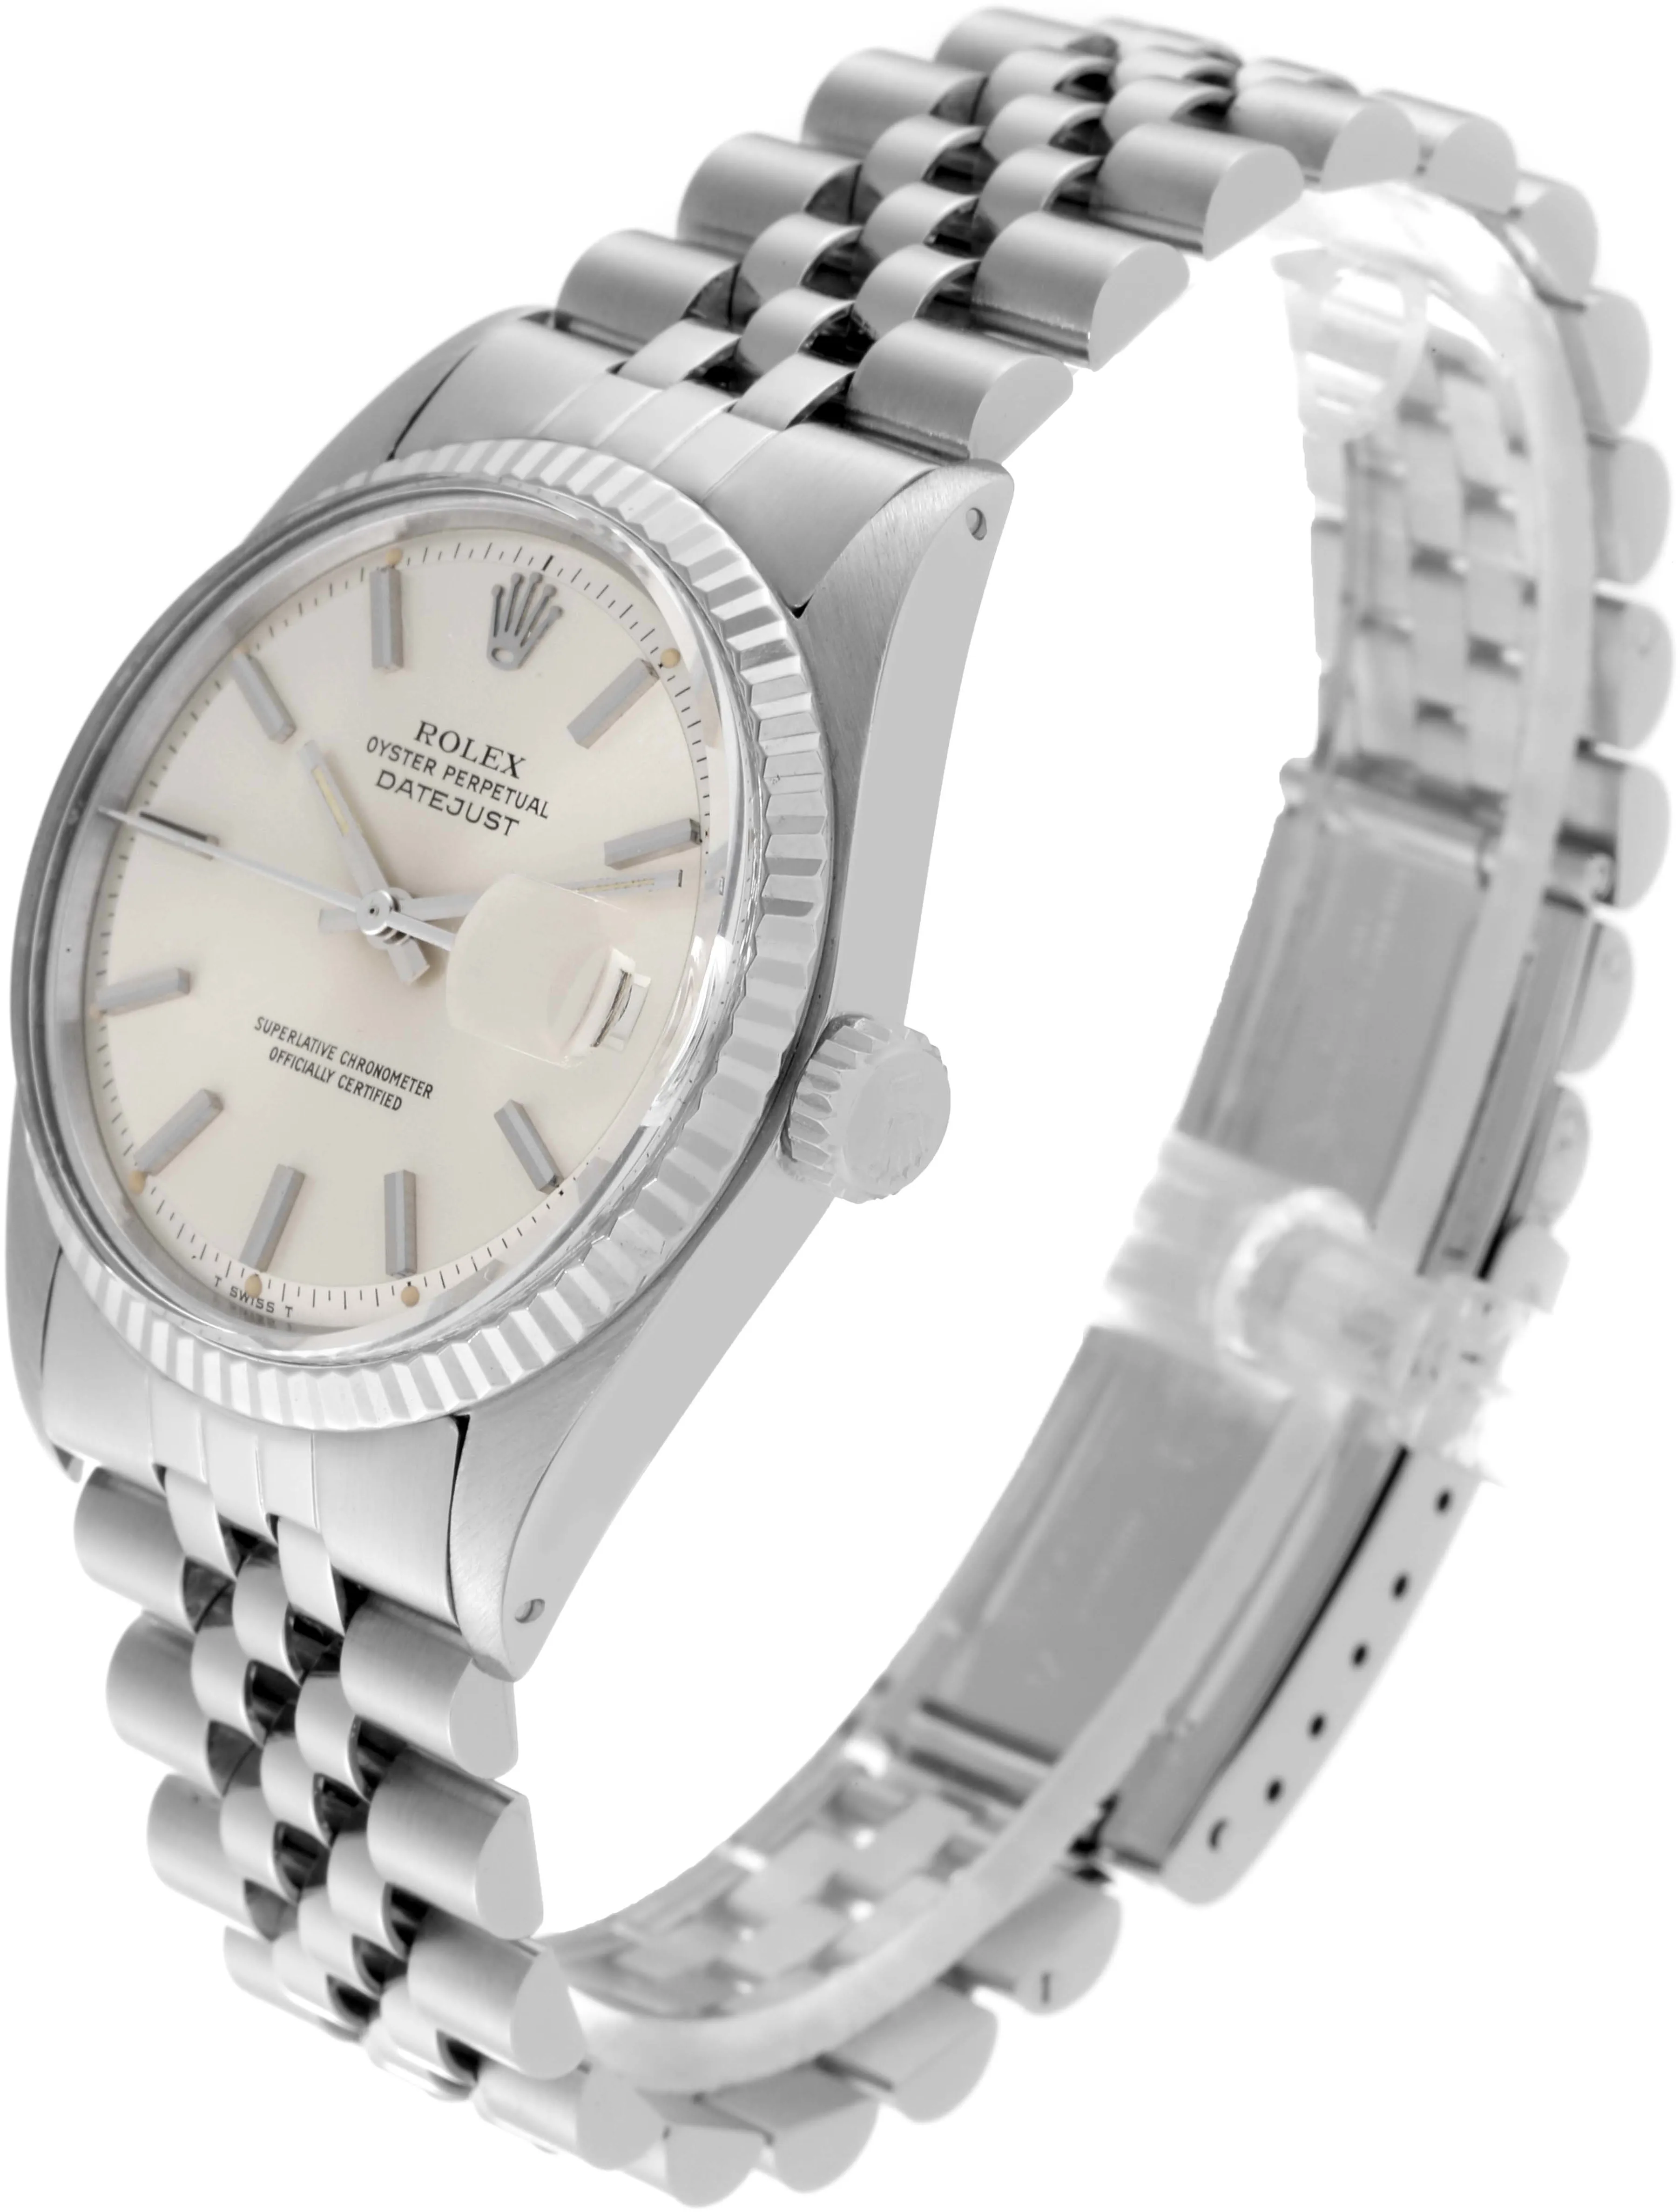 Rolex Datejust 1601 36mm Stainless steel Silver 4